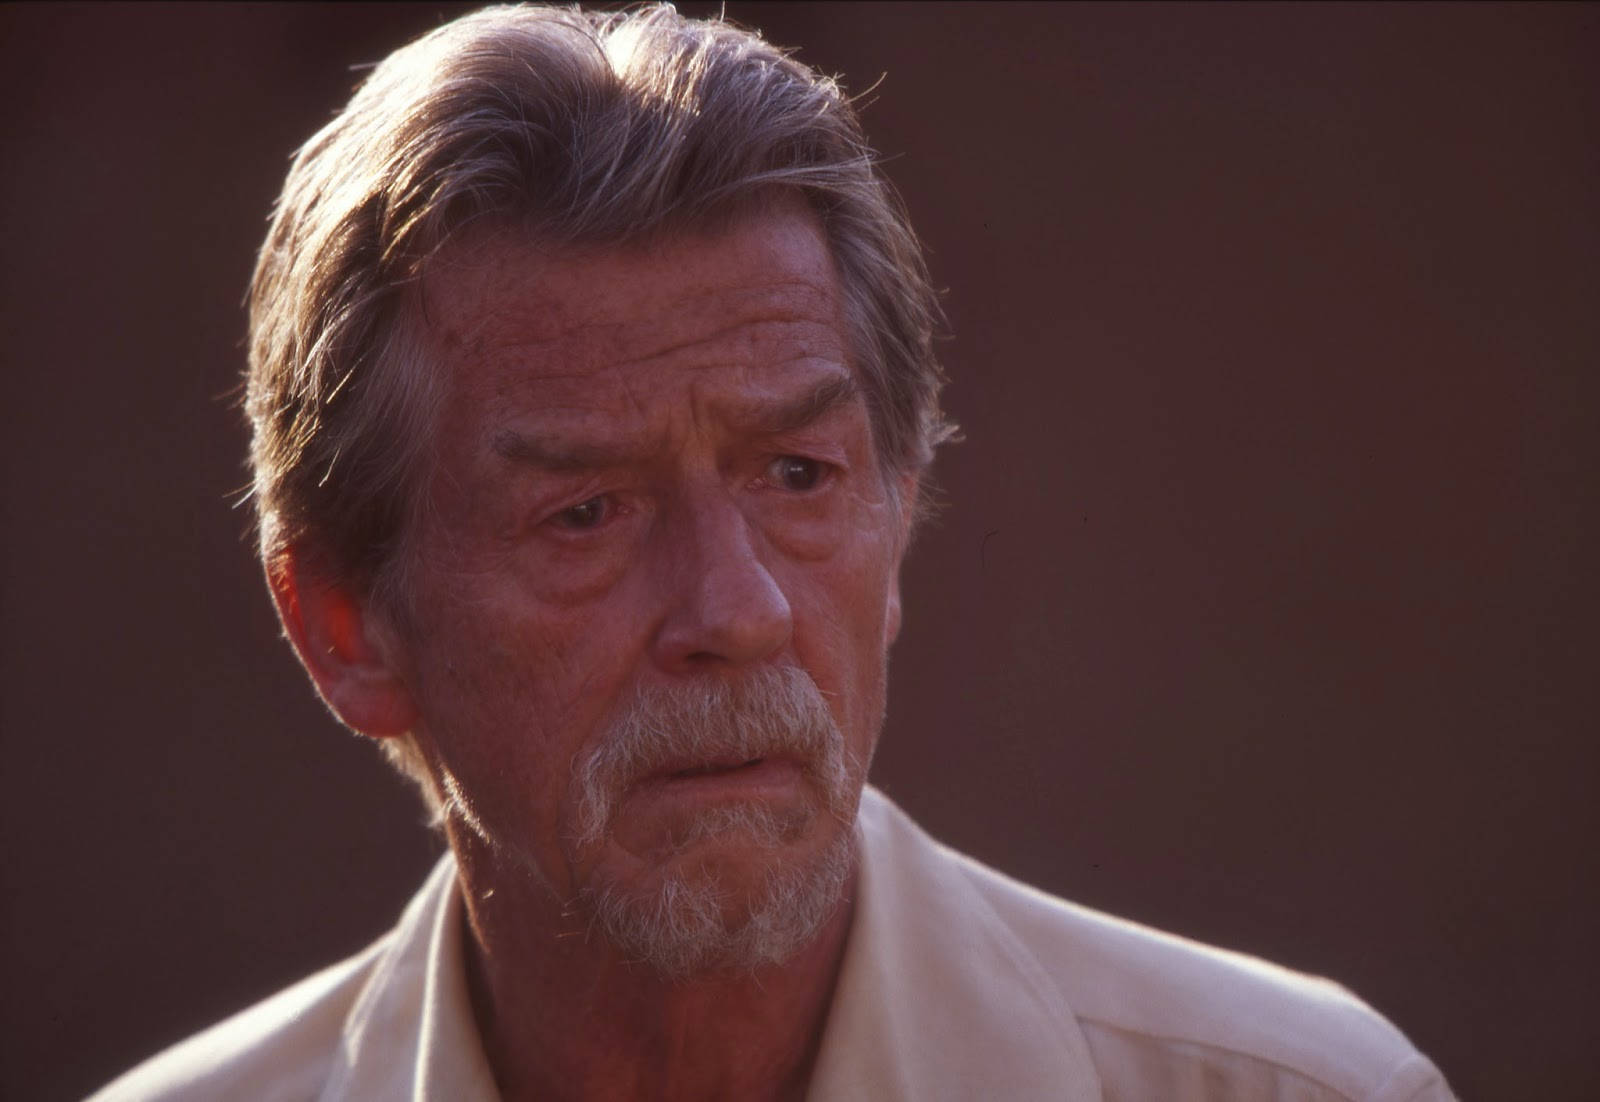 Johnhurt Gråa Hår Sorgsna (this Doesn't Really Make Sense In Swedish, But Assuming It's A Title For A Wallpaper, It Could Be Translated As 